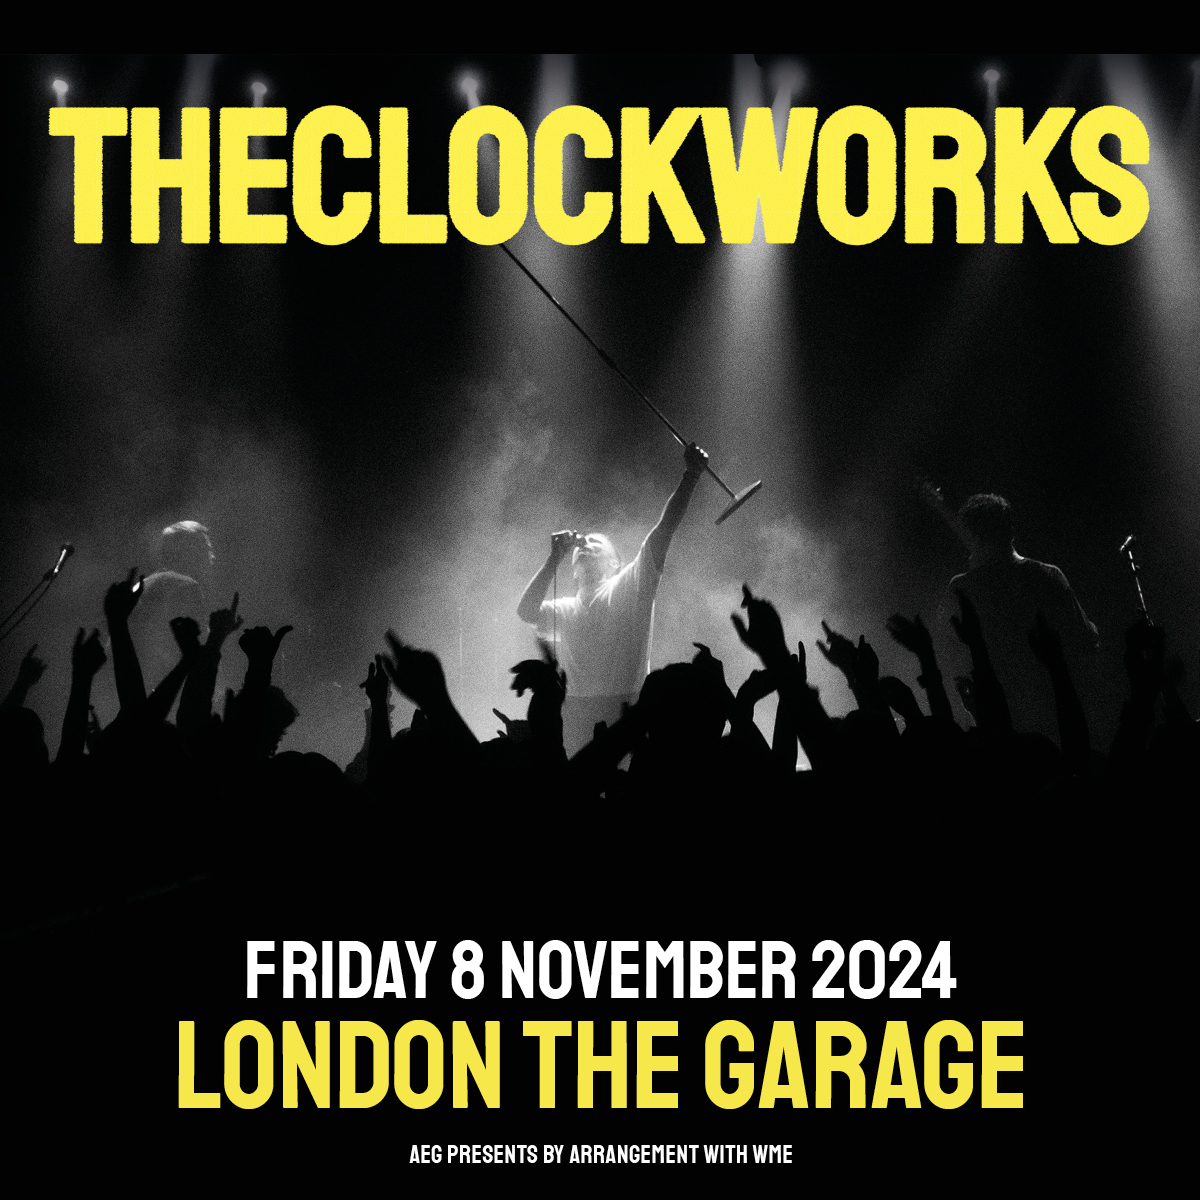 #AXSONSALE 🎶 Don't miss @daclockworks live at @TheGarageHQ in London on November 8th! 🌟 Prepare for an unforgettable night of indie rock 🎵🔥 ⏰ Tickets are on sale now 🎫 w.axs.com/9OgV50R0Z1M